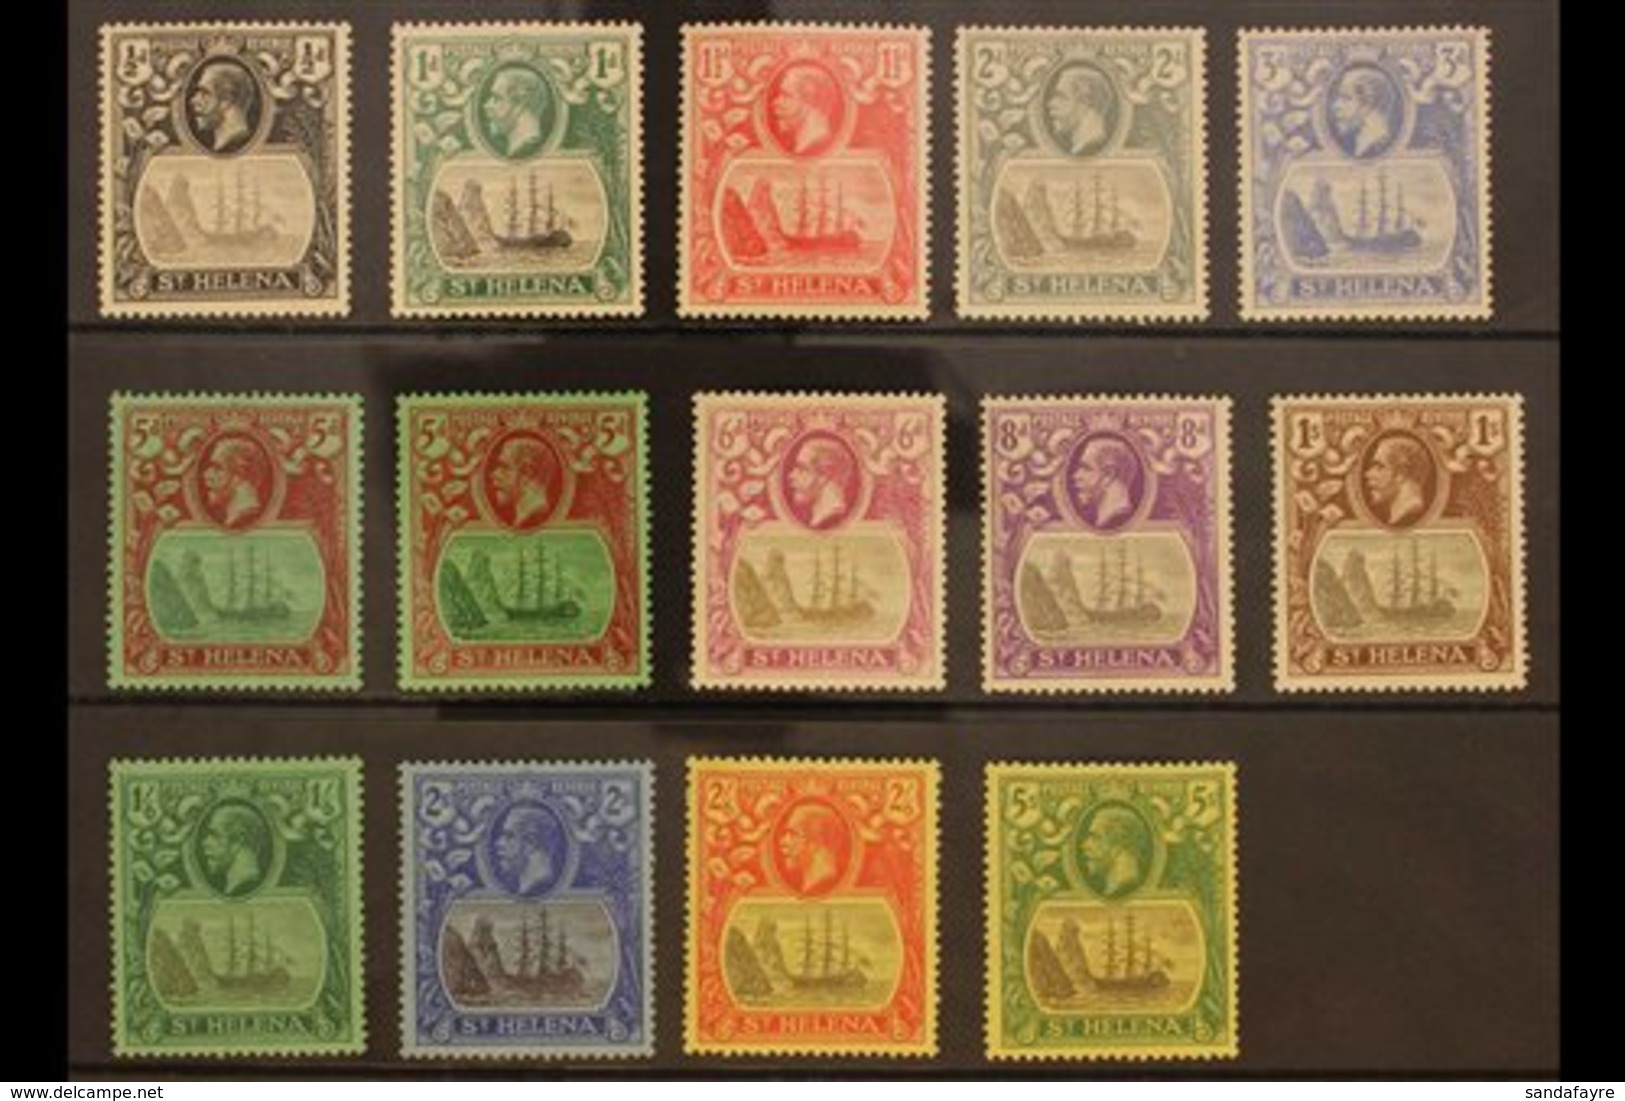 1922-37 ½d To 5s KGV Badge Defins Plus 5d Shade, Wmk Script CA, SG 97/110, 103d, Very Fine Mint (14 Stamps). For More Im - Isola Di Sant'Elena